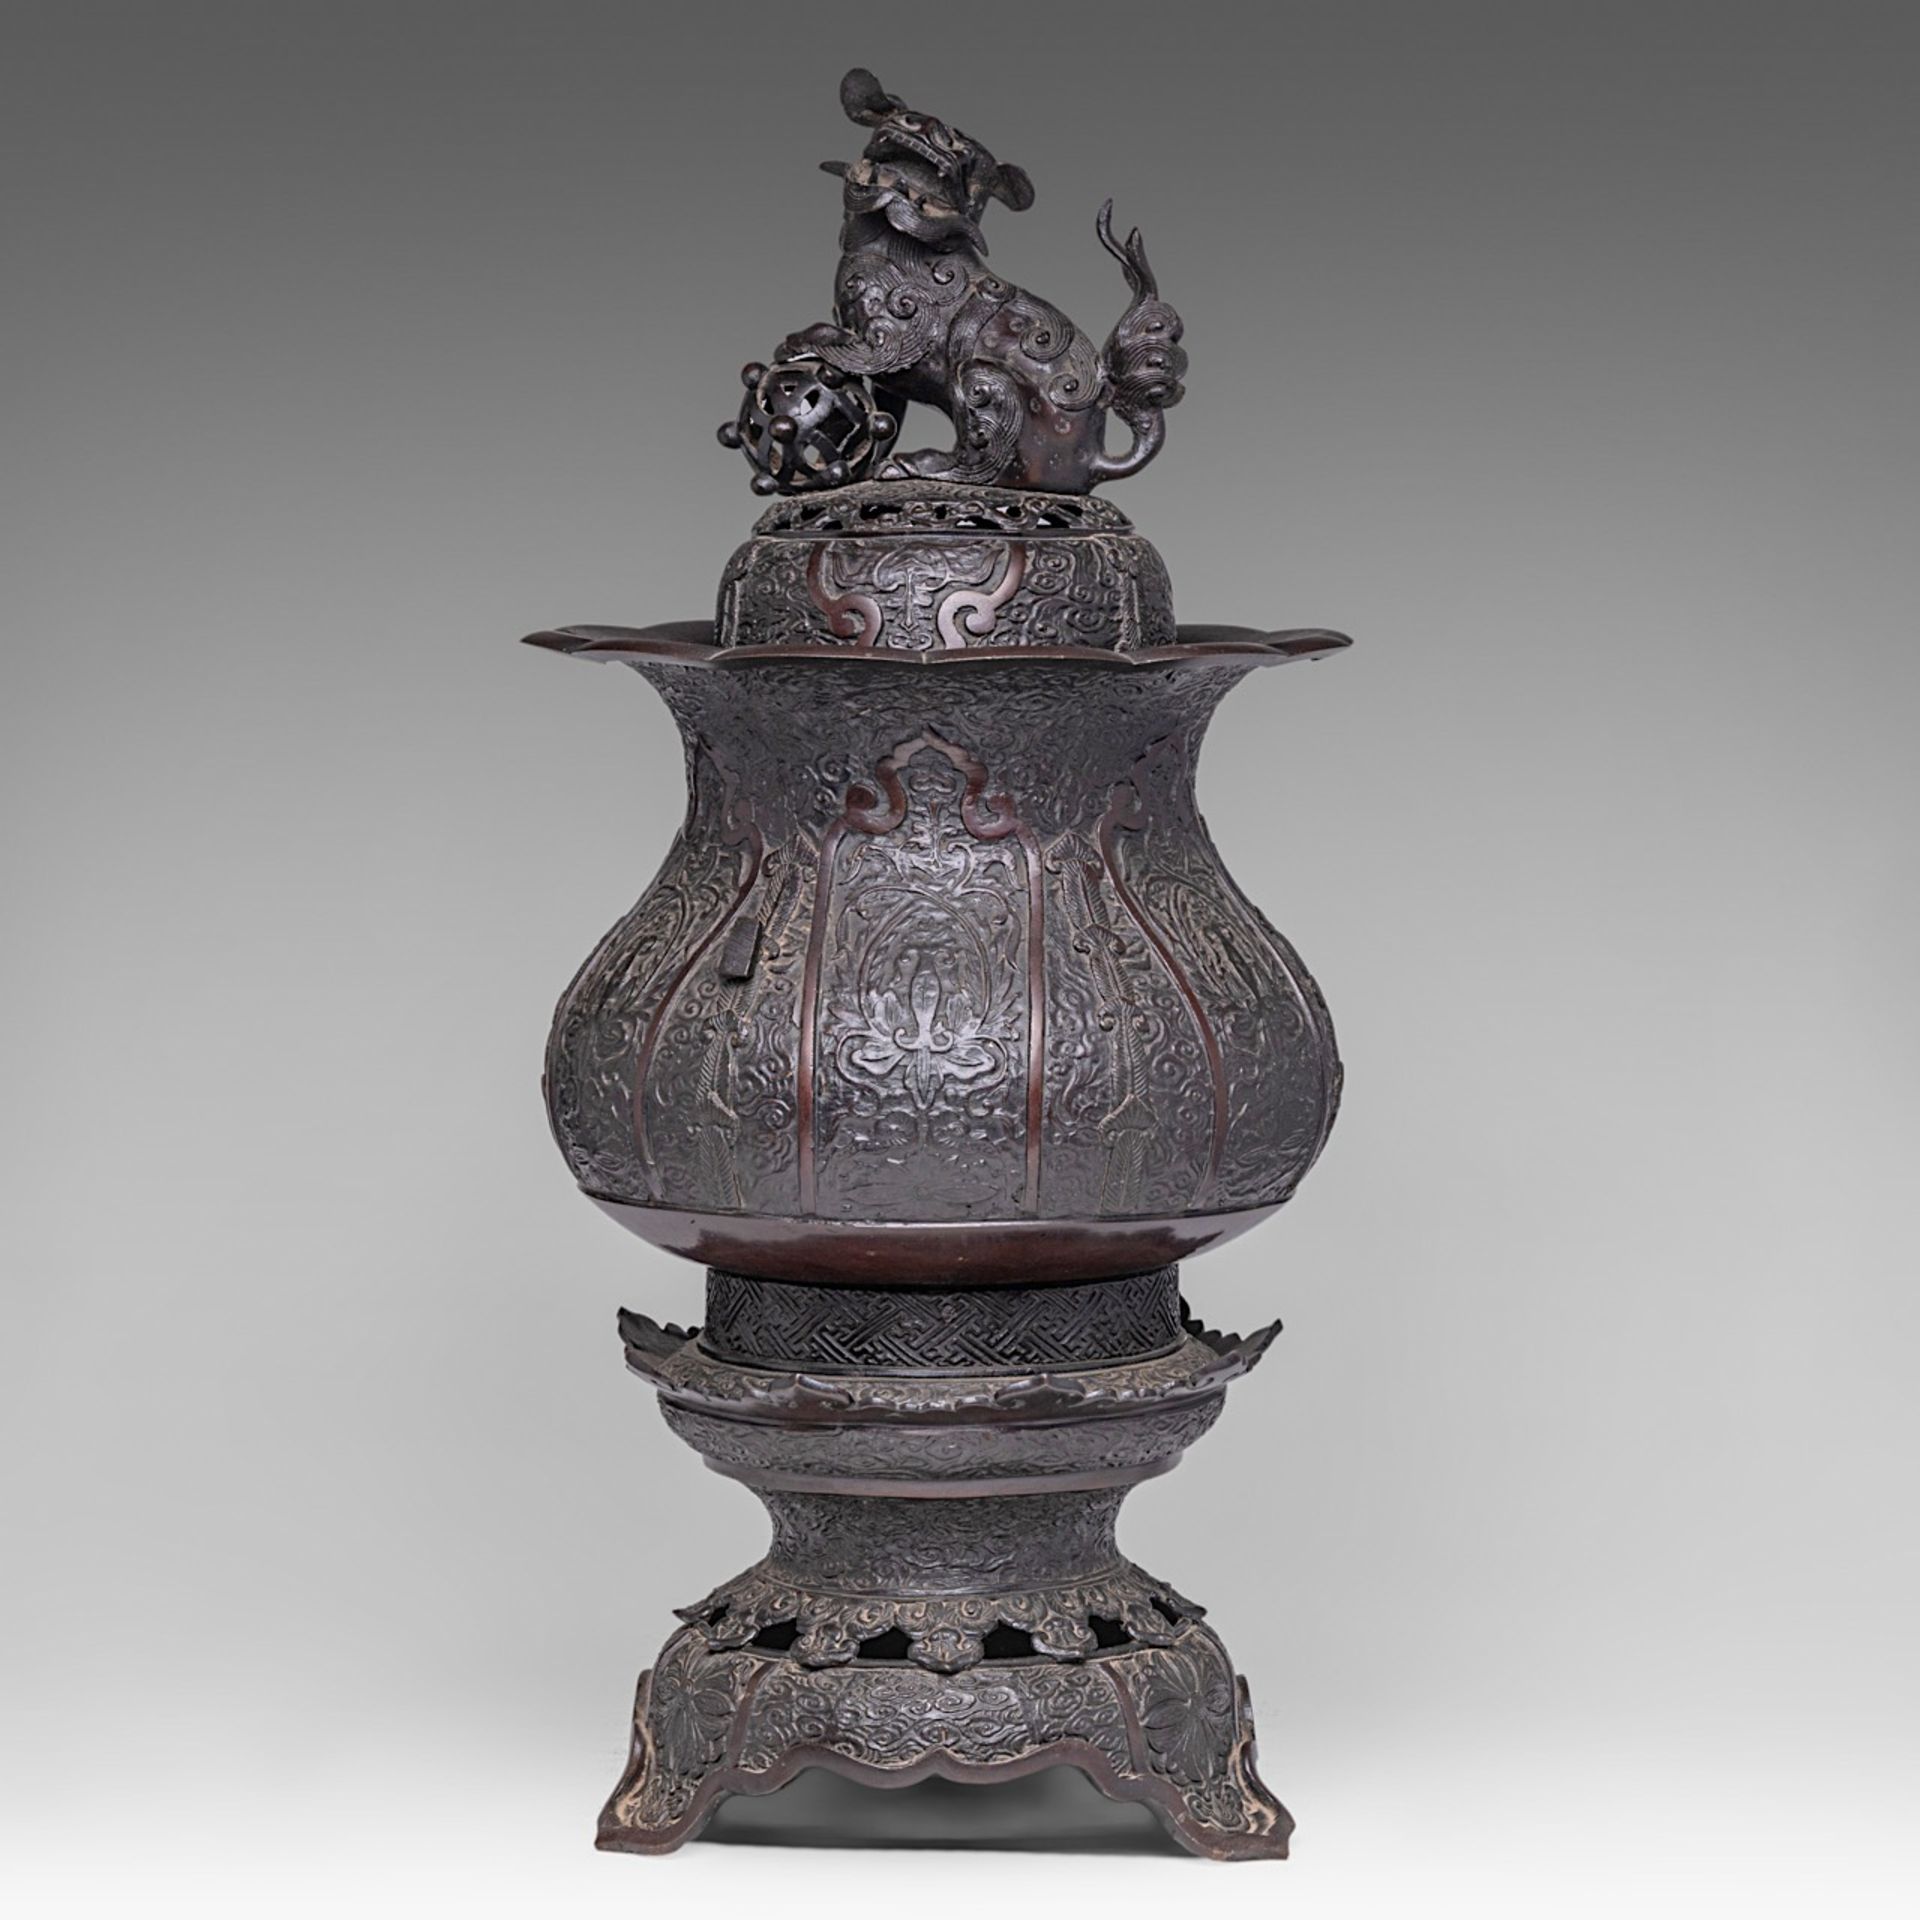 A large Japanese bronze censer with a shishi on top, Meiji period (1868-1912), H 60 cm